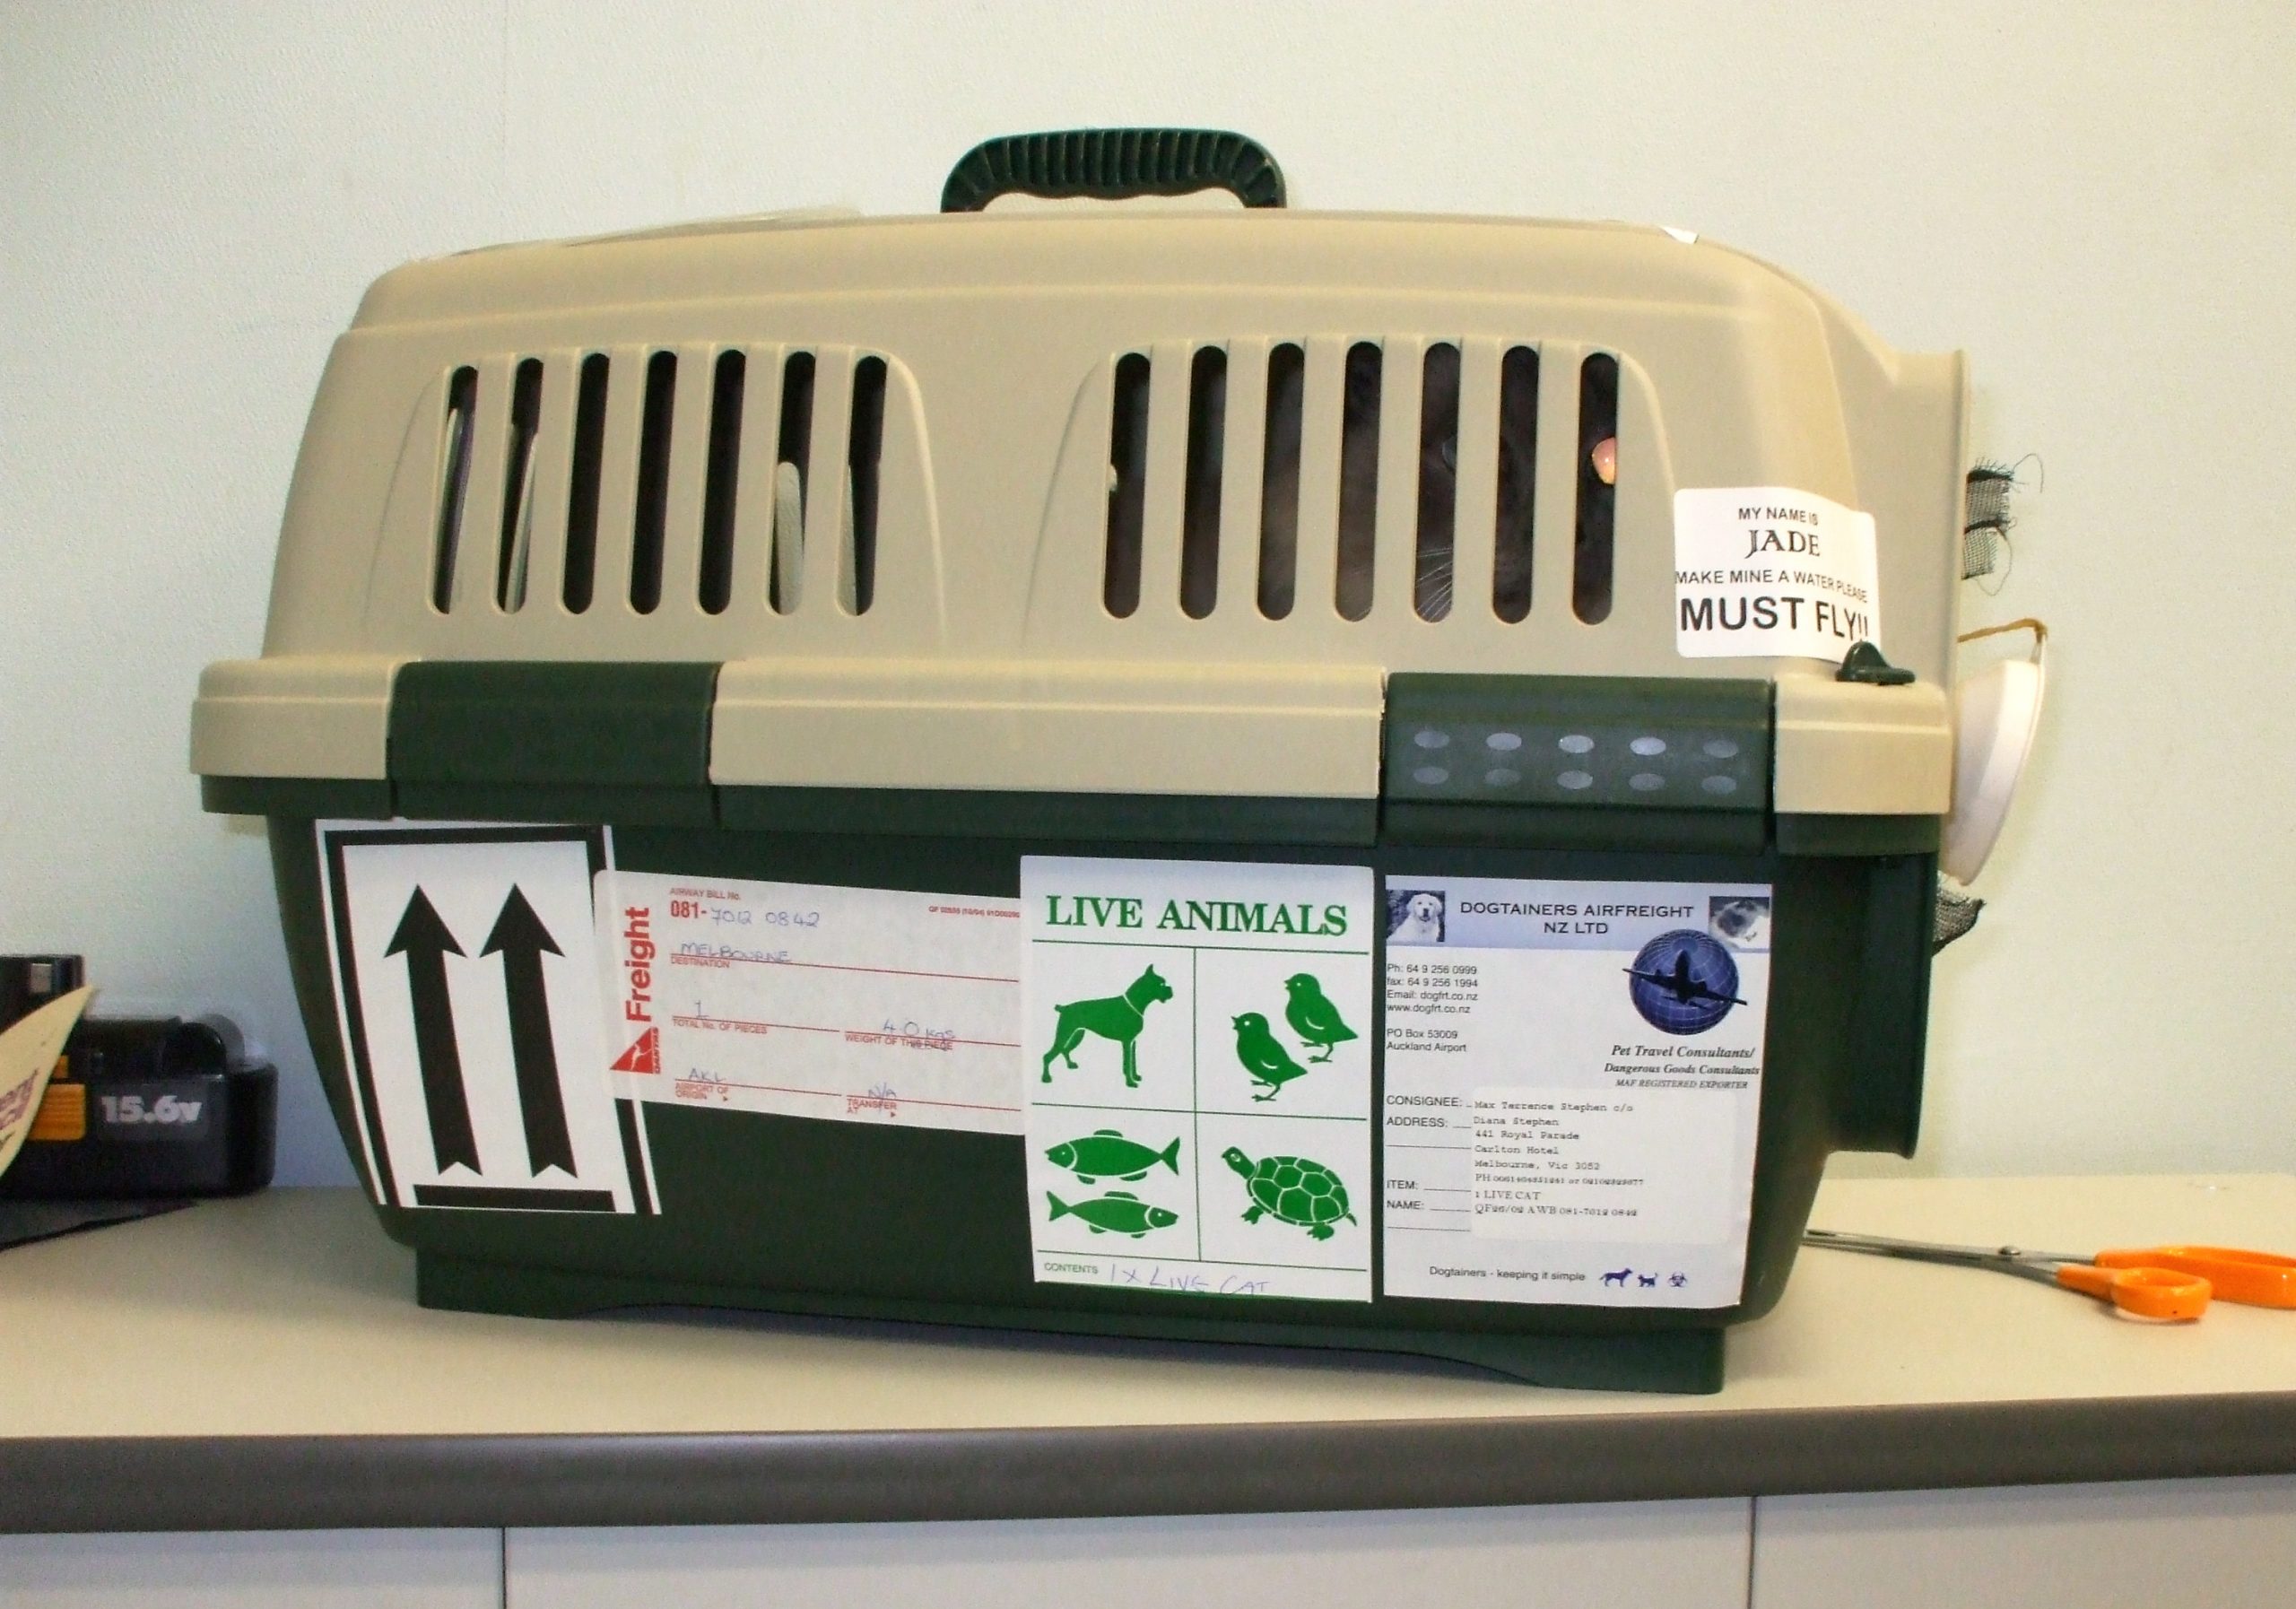 Plastic cages for transporting cats and dogs.